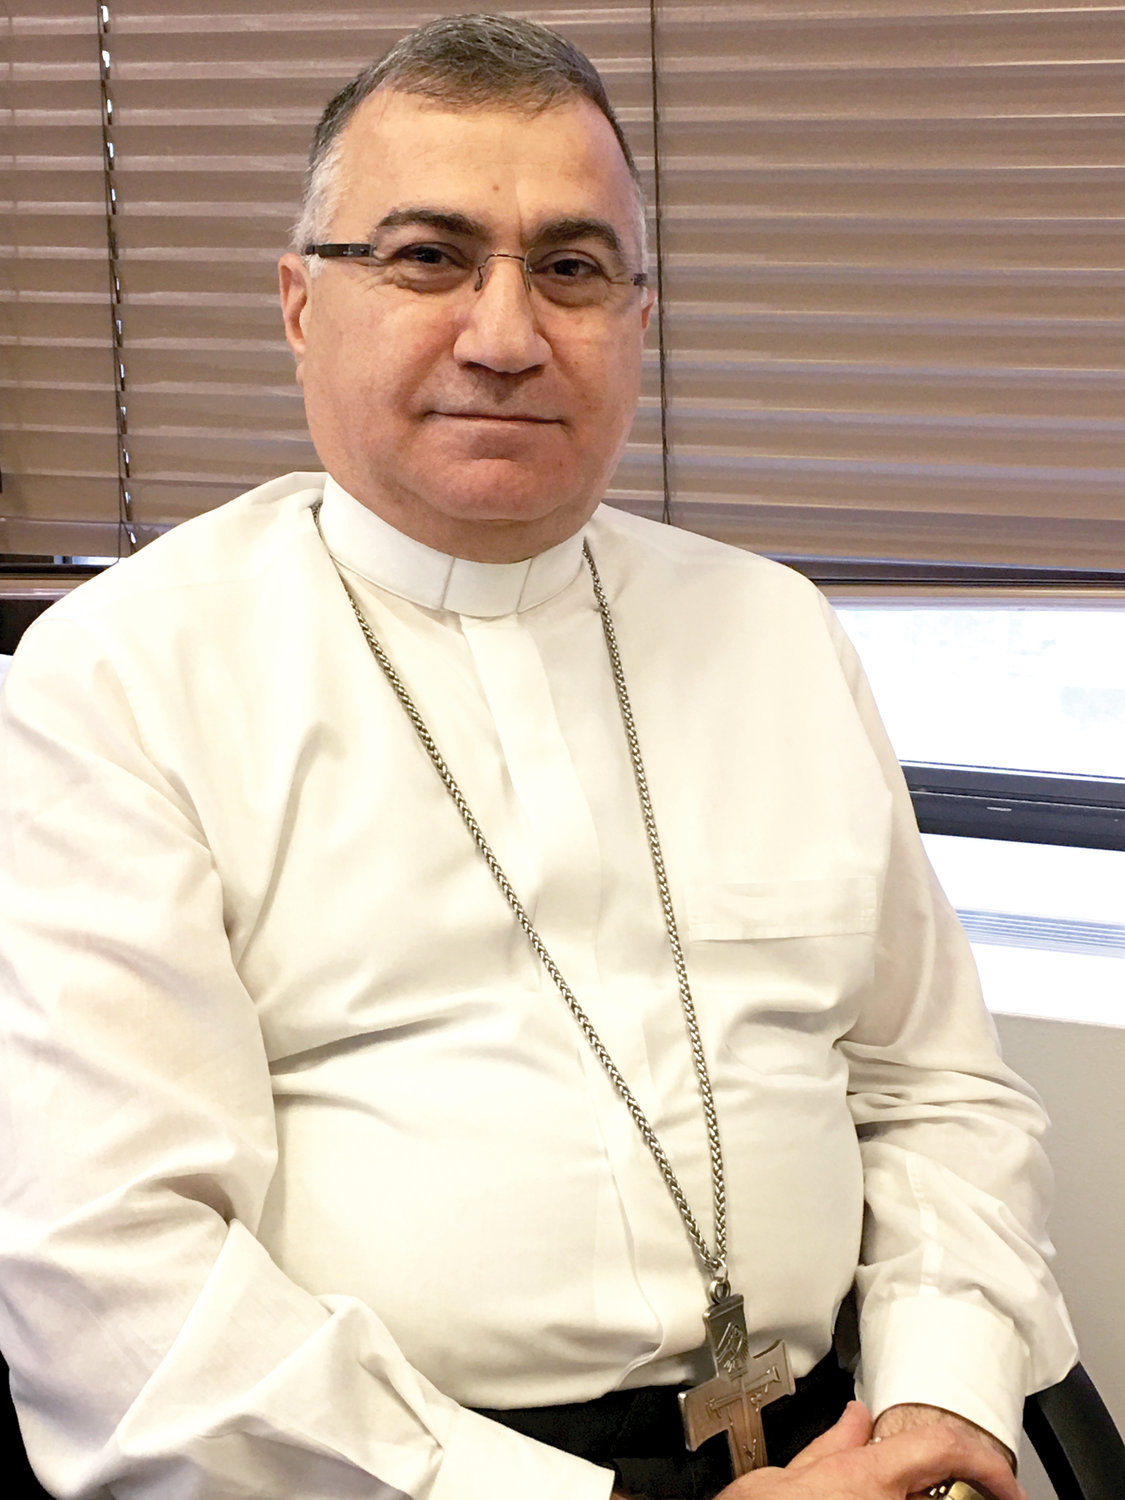 COMMITMENT—Archbishop Bashar Warda of the Archdiocese of Erbil, Iraq, was in New York last week meeting with friends and supporters. Although the Christian community in Iraq has suffered greatly in recent years, the archbishop is building hope for its future through his work promoting Catholic education and other initiatives there.